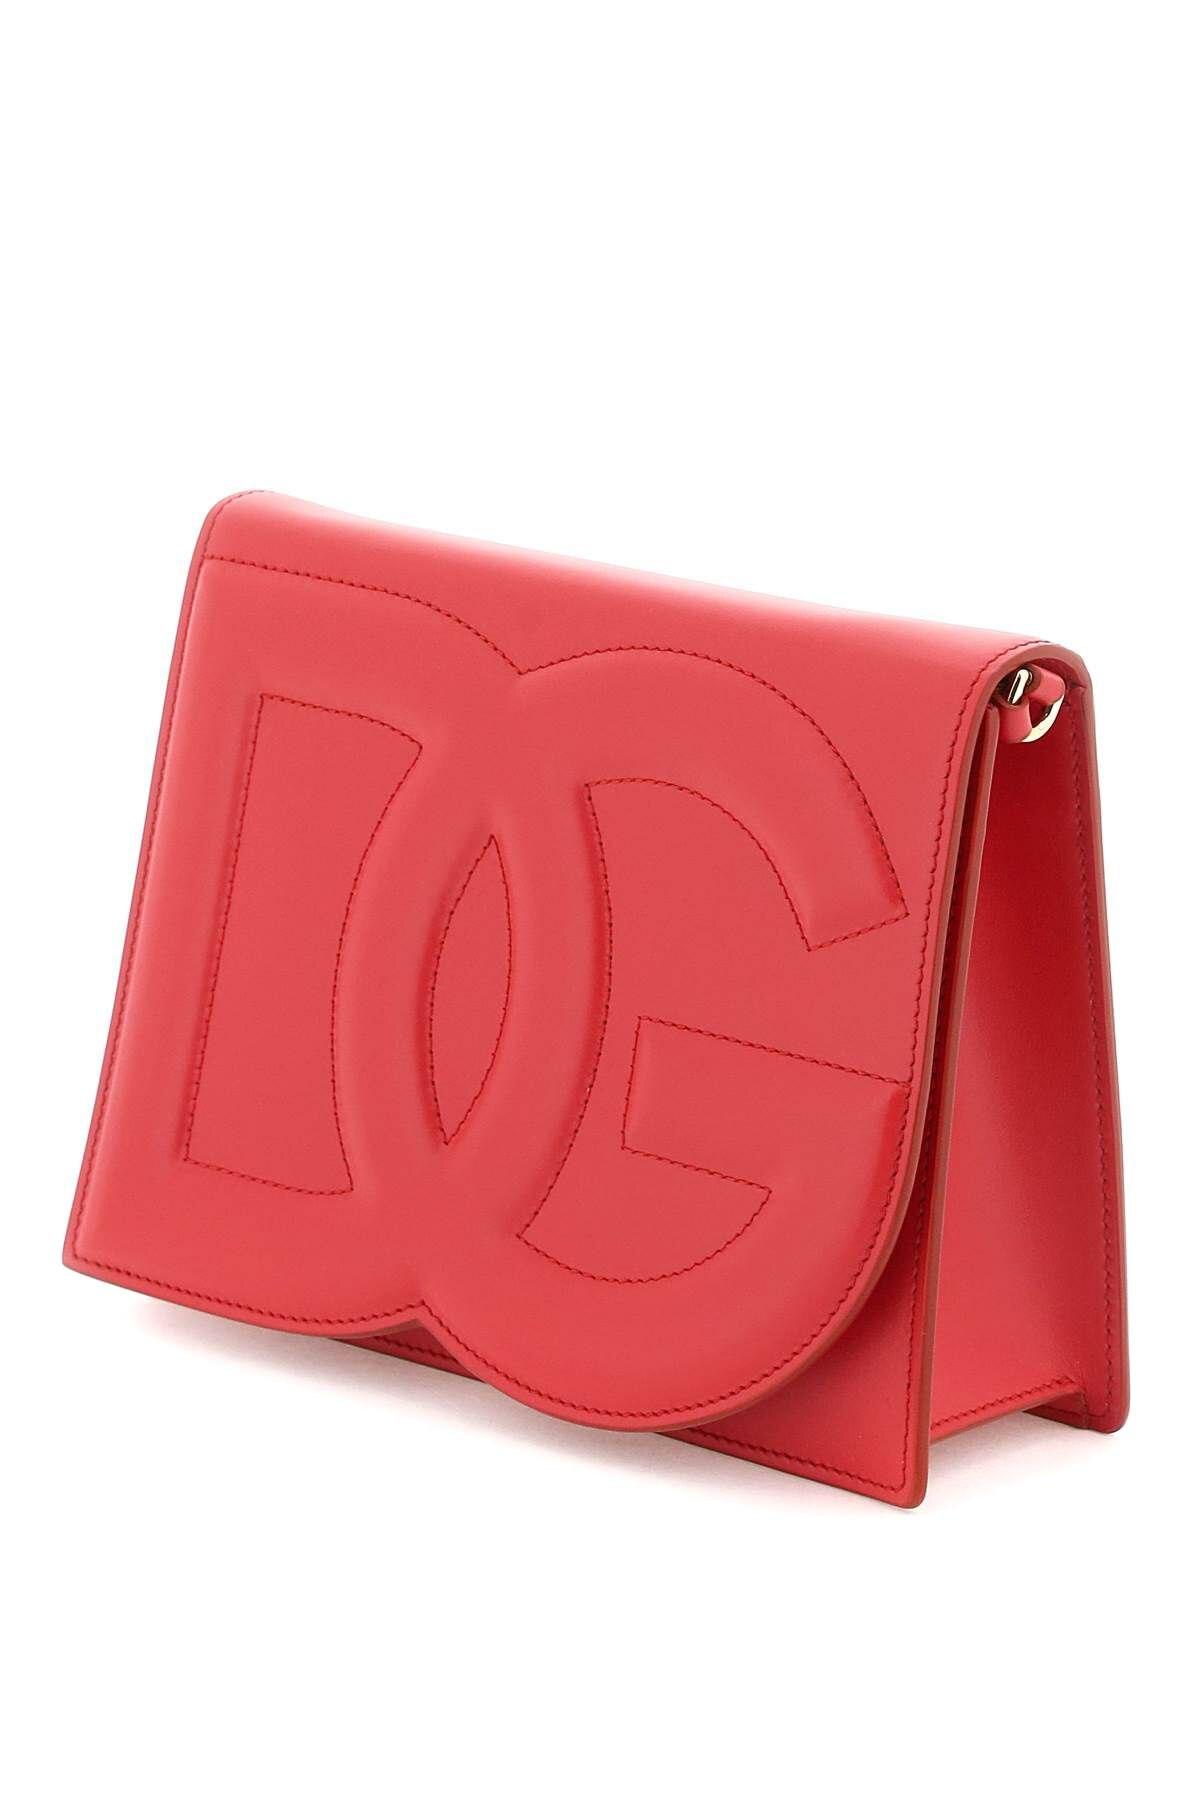 Dolce & Gabbana Leather Crossbody Bag In Red